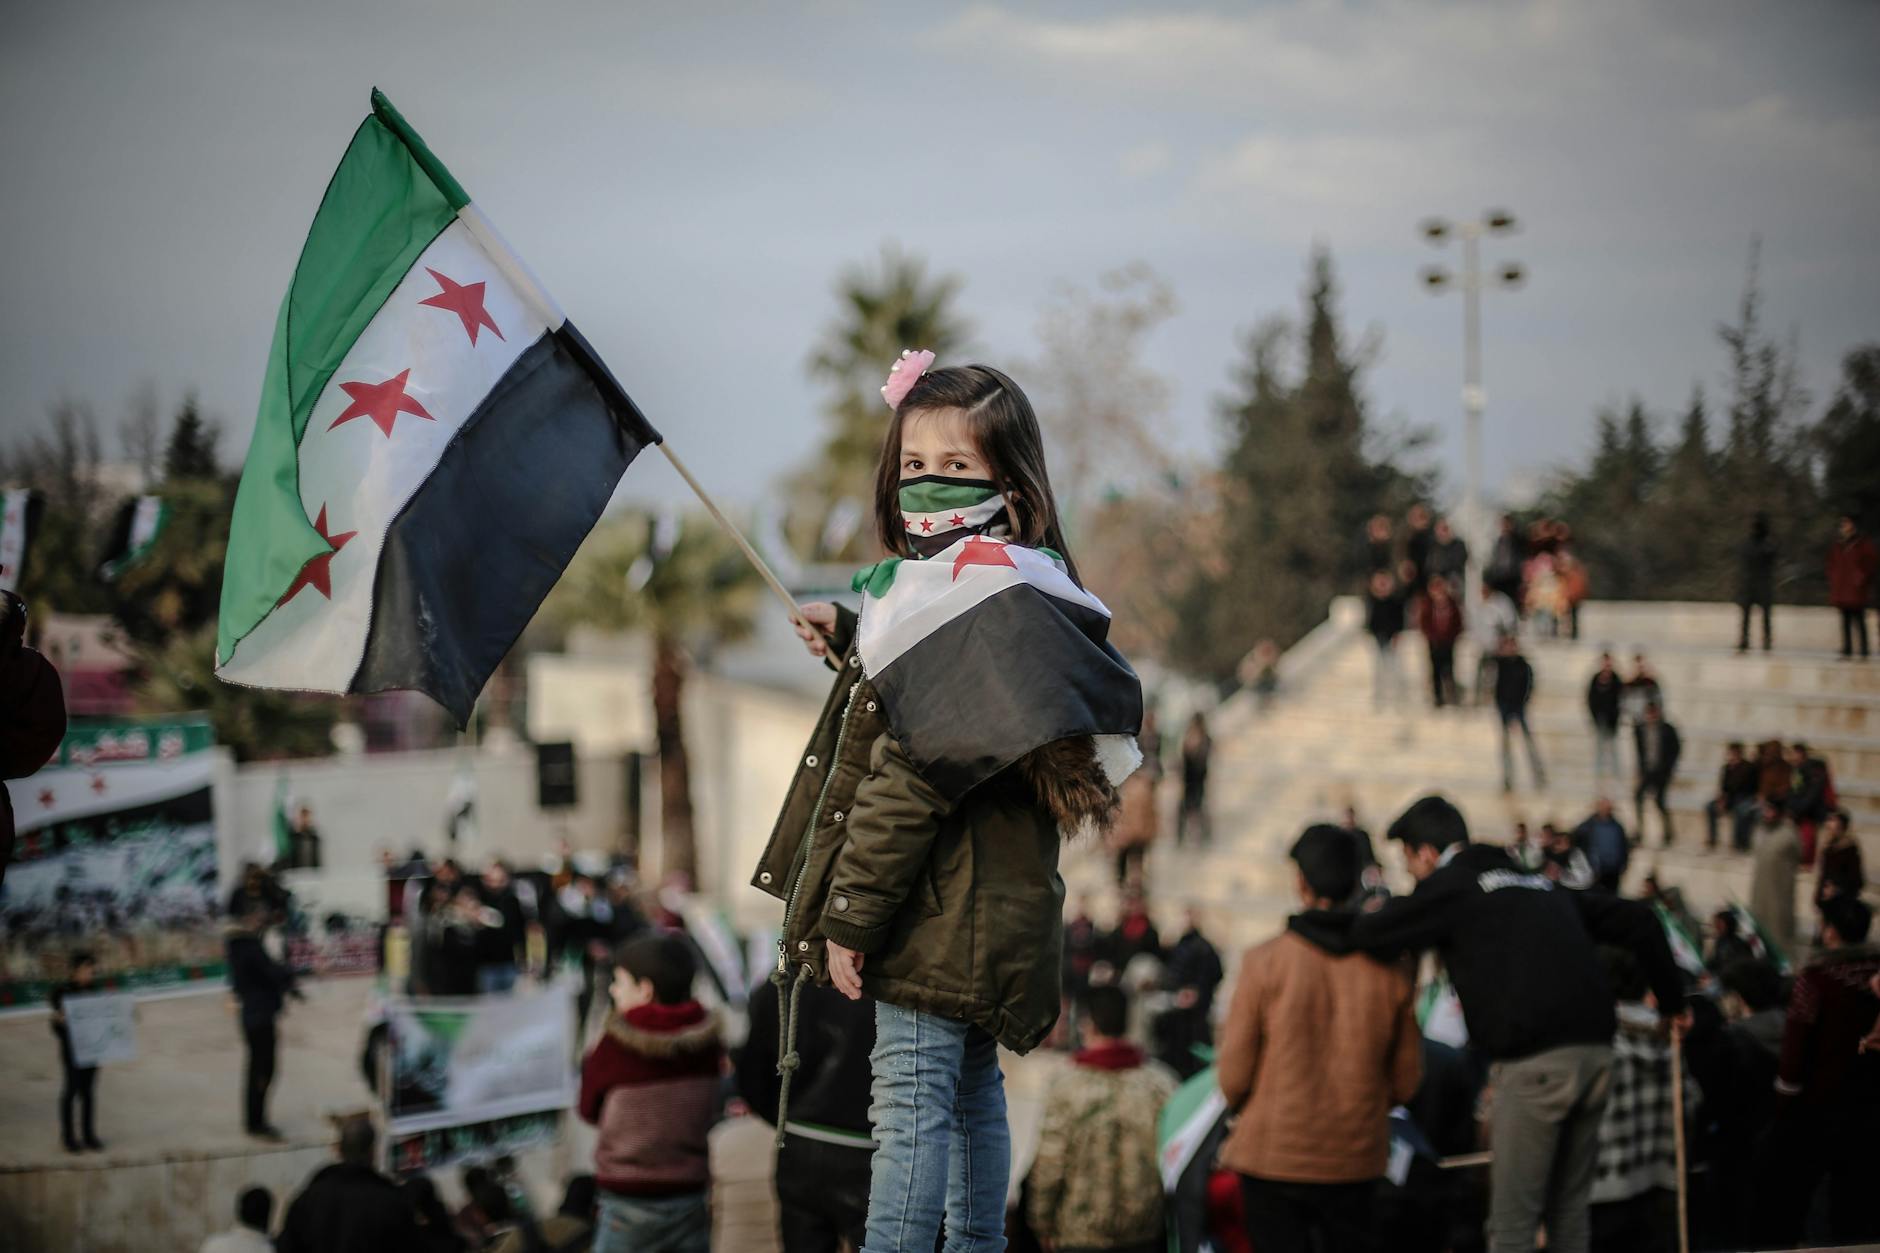 a young girl holding a Syrian flag